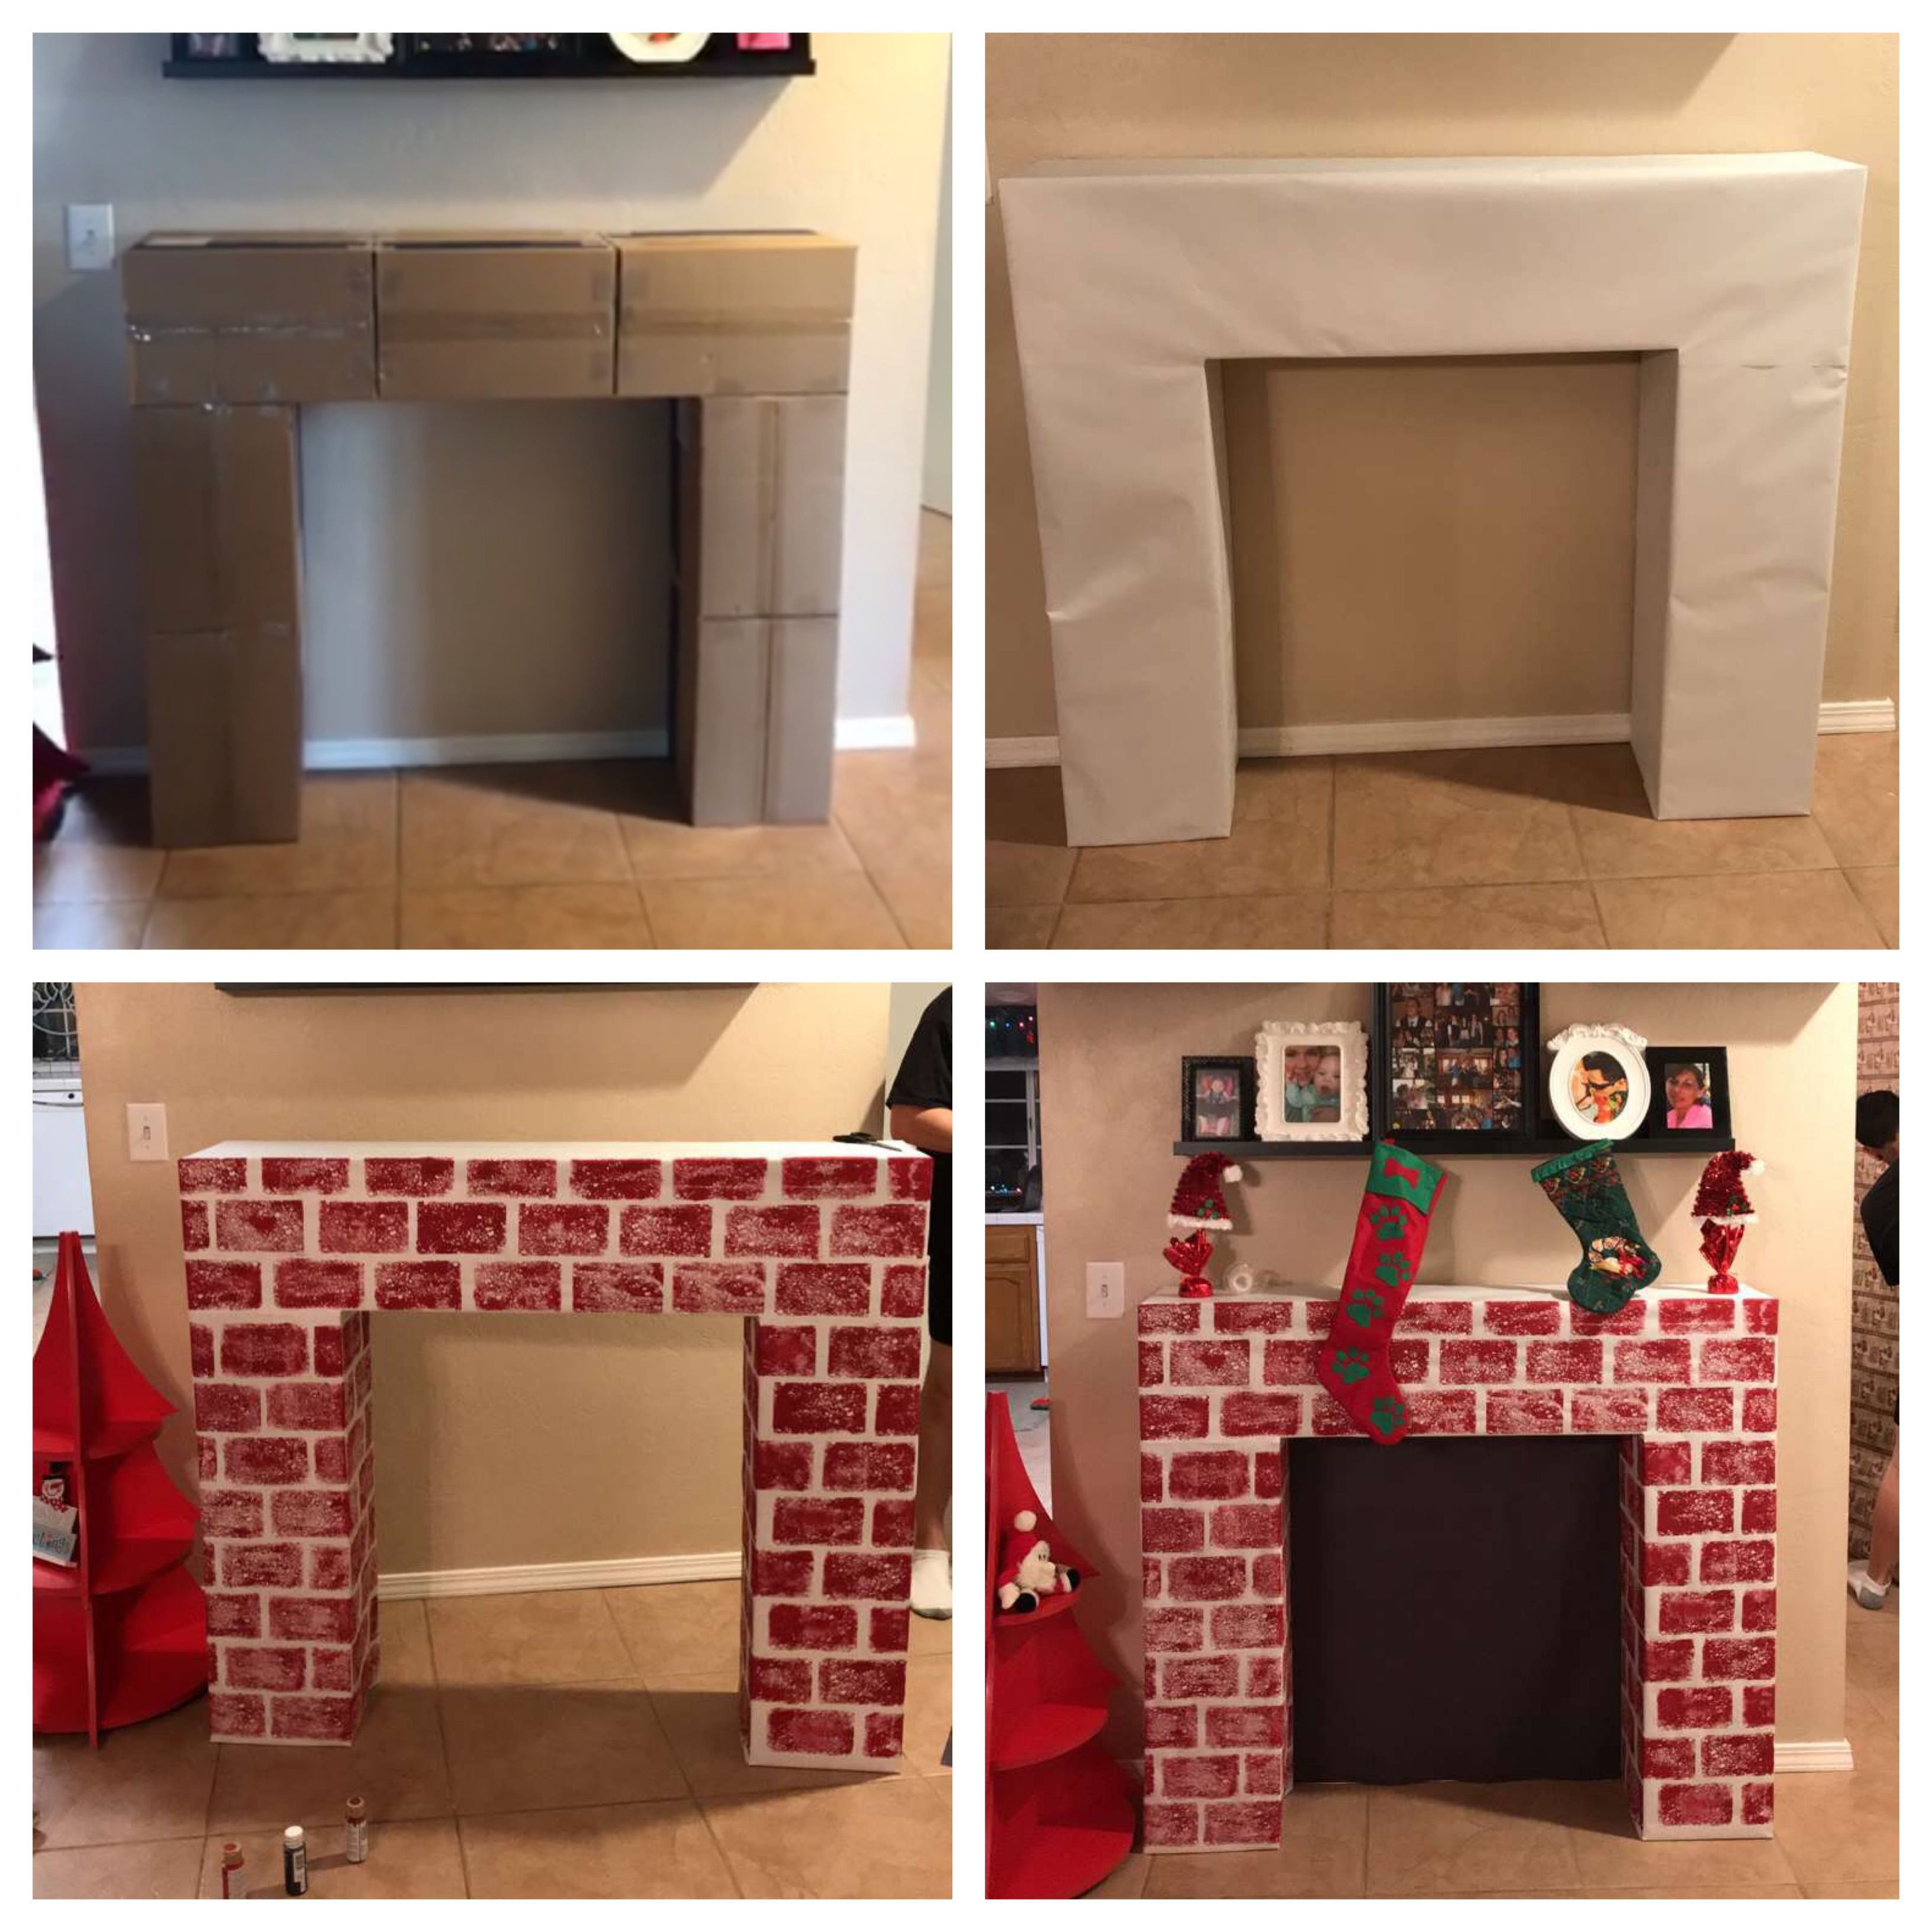 Christmas Corrugated Fireplace Brick Paper
 DIY fireplace made out of cardboard boxes and painted